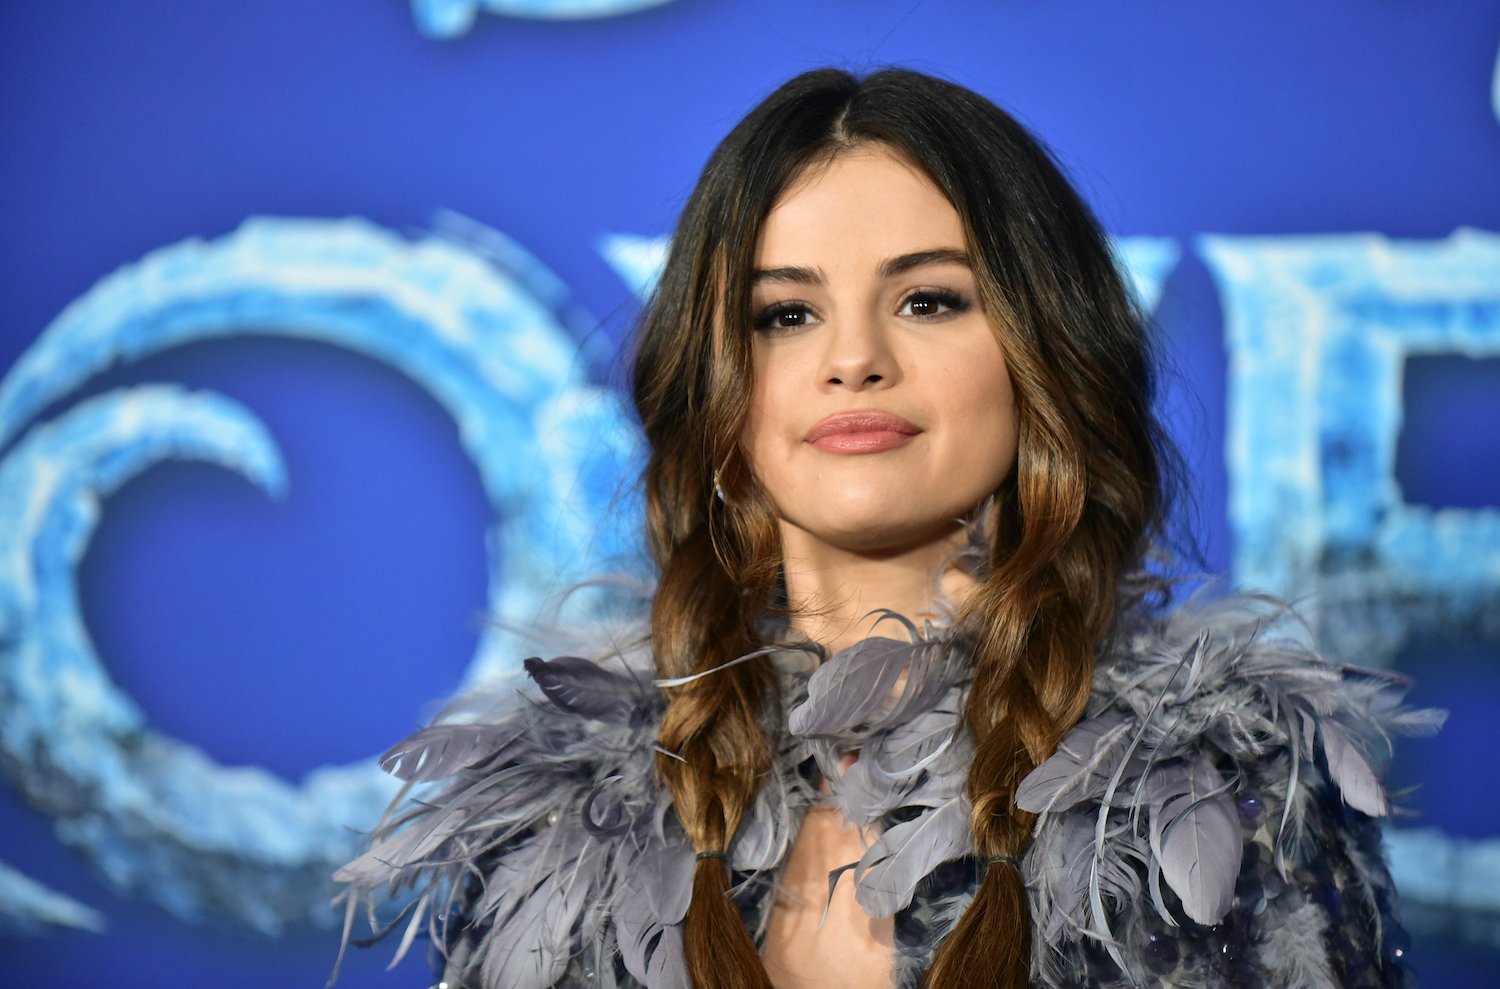 Selena Gomez attends the premiere of Disney's Frozen 2 at Dolby Theatre on November 07, 2019